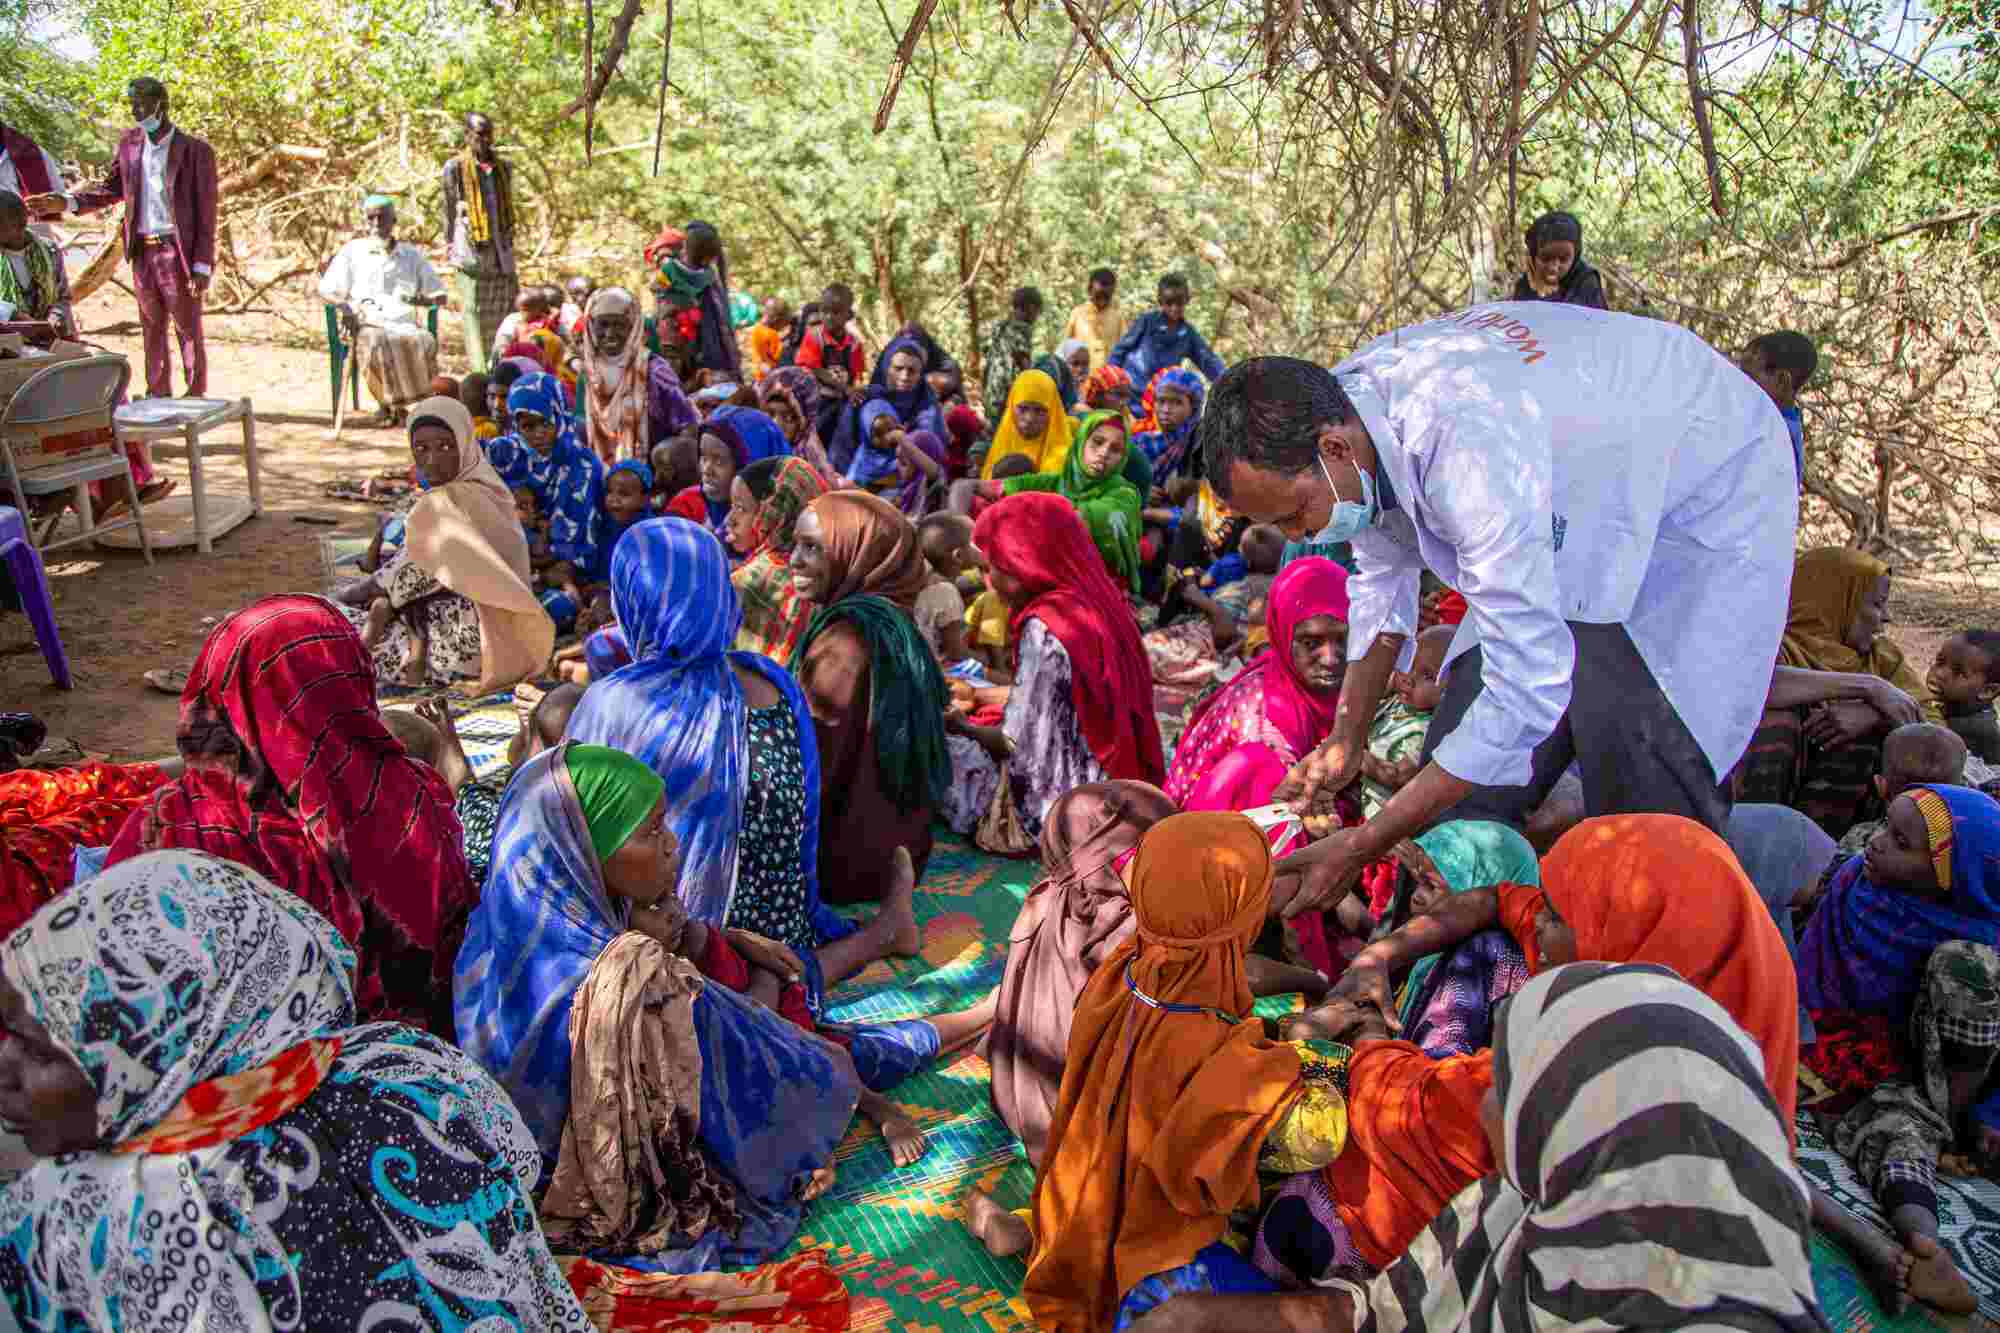 In an Internally Displaced Persons camp in Somalia, a group of people sit on the ground while World Vision staff distribute essential food and supplies. 